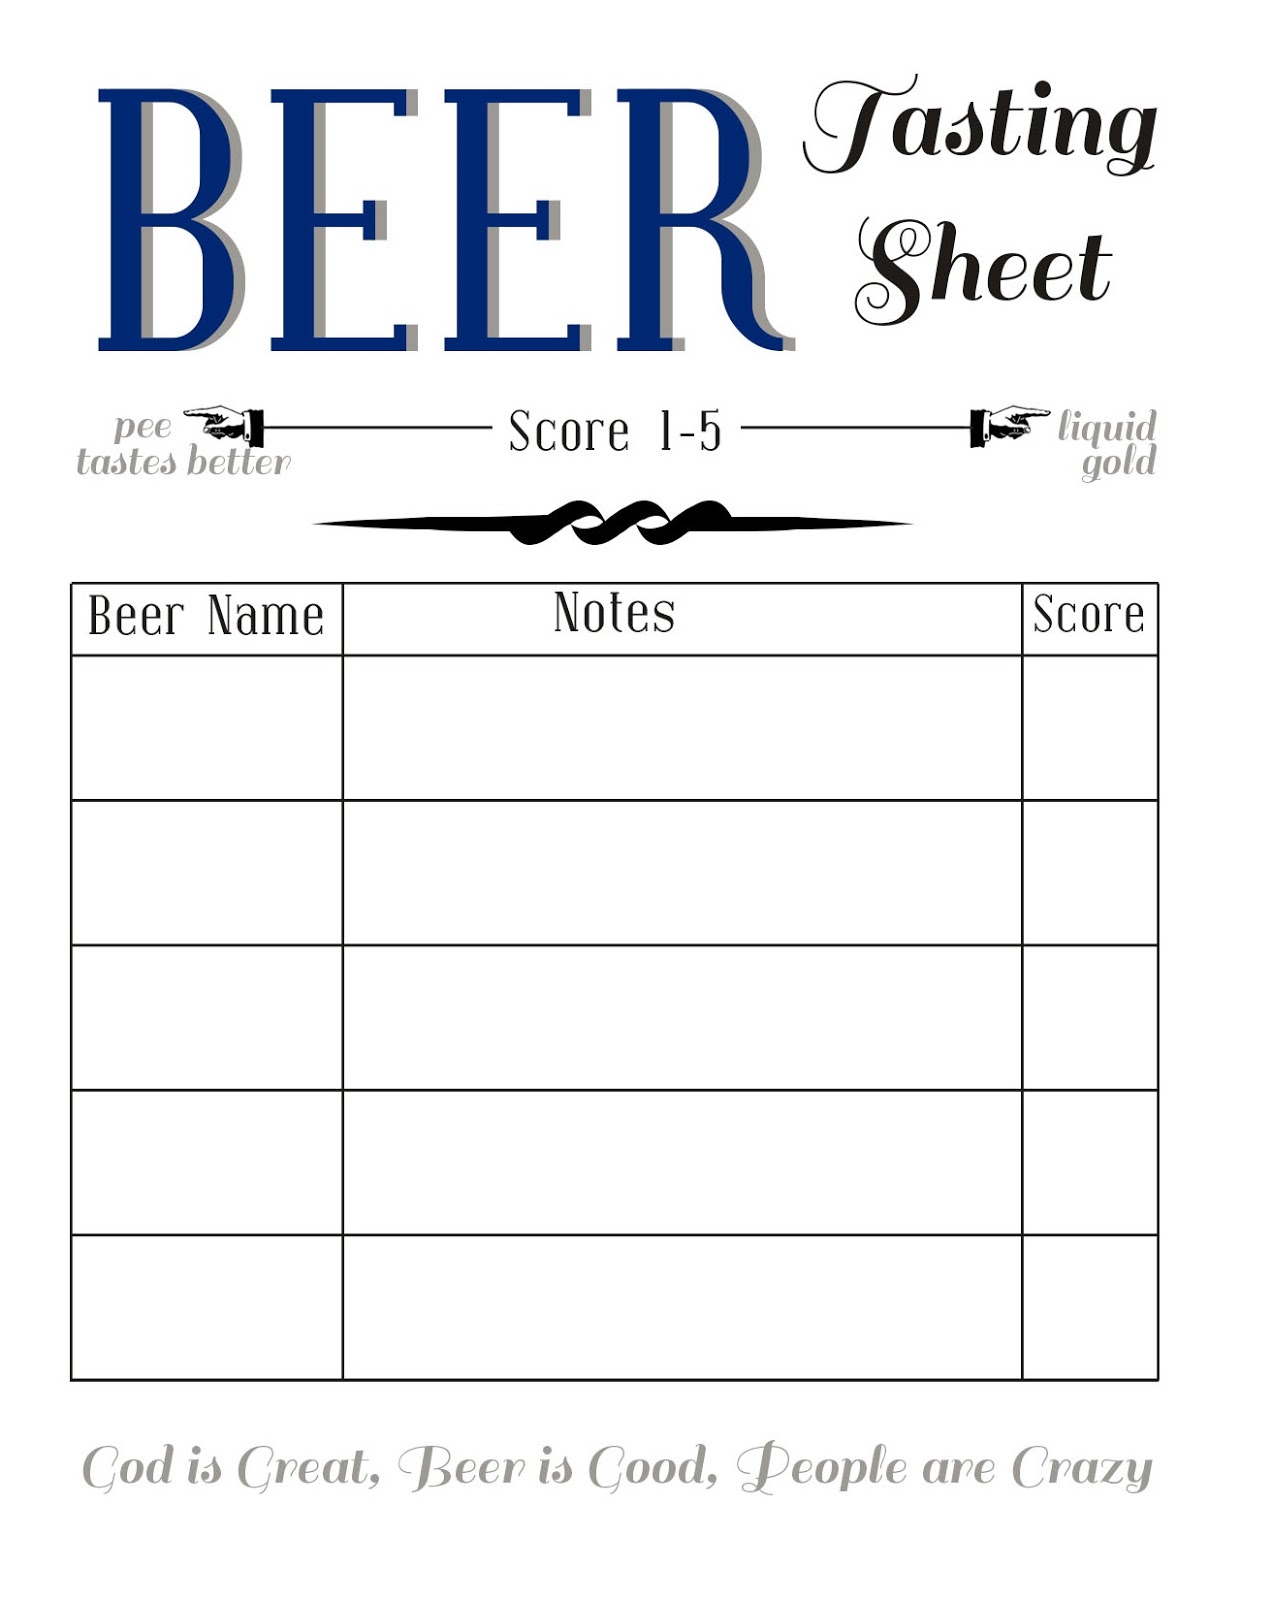 Beer Rating Sheet Bacon Beer Tasting Party Pinterest